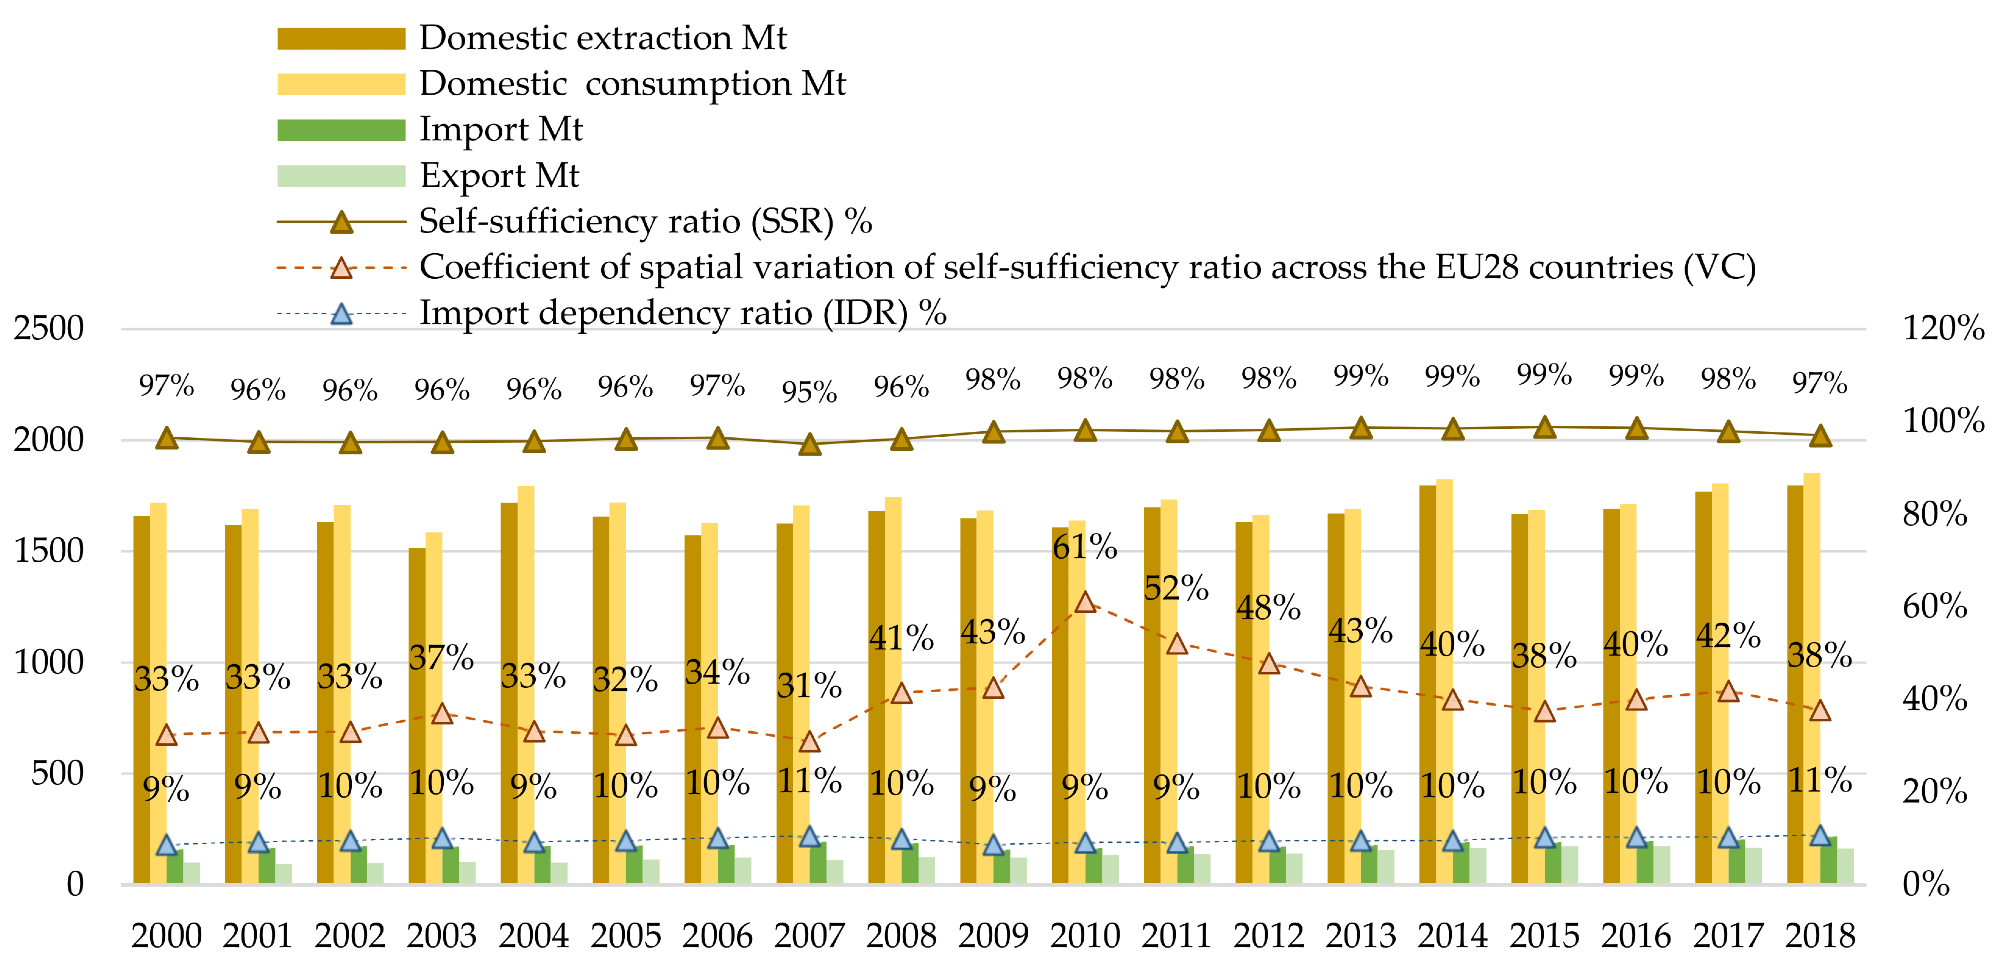 Trends of the biomass extraction, consumption, and self-sufficiency in the EU-28. Source: Own composition based on the material flow accounts data from the Eurostat database.